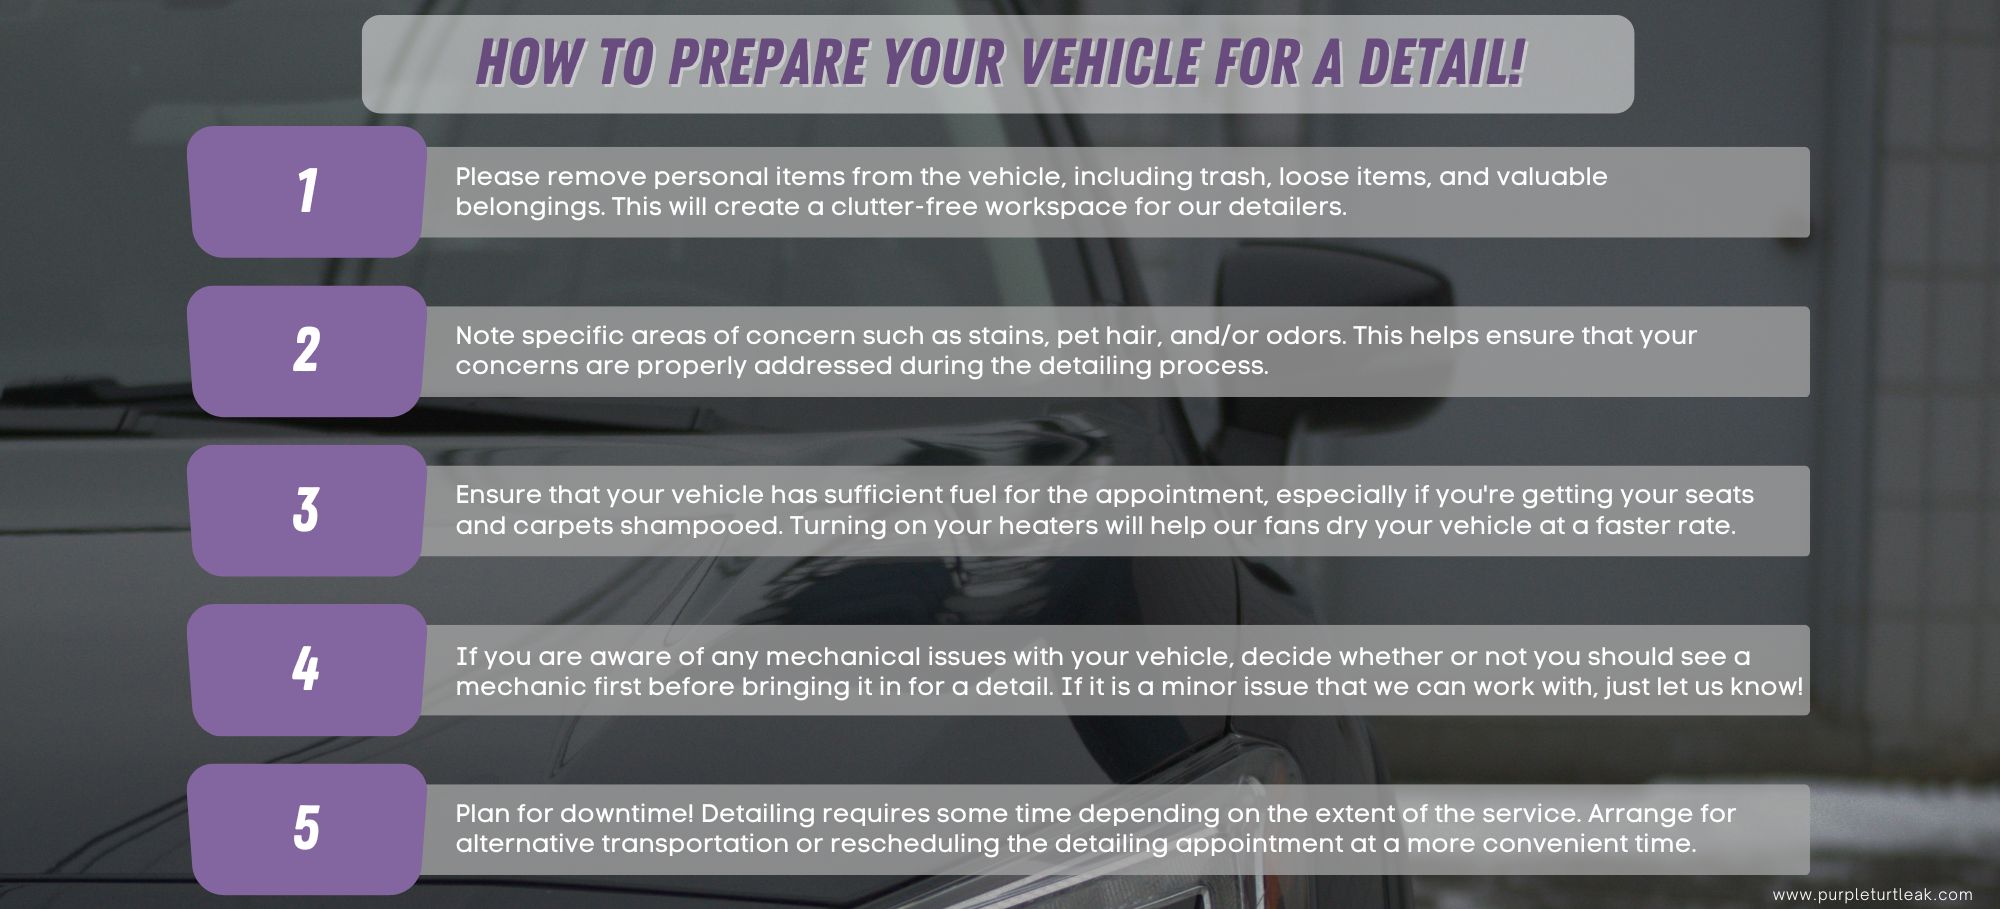 How to prepare you vehicle for a detail! (11 x 8.5 in) (1)